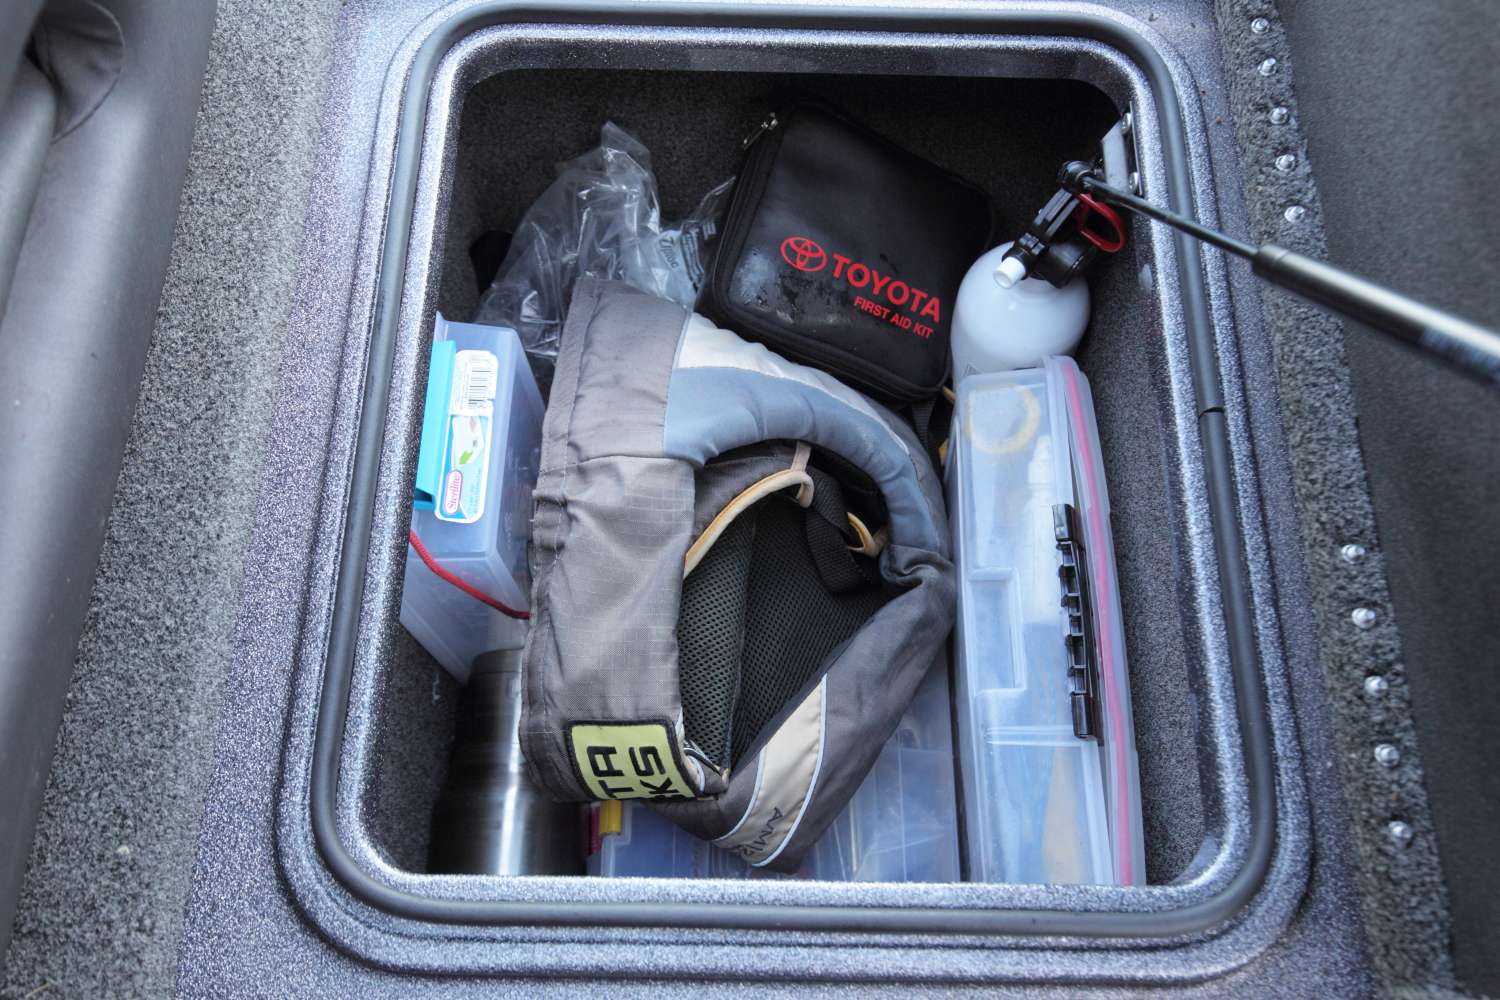 One rear box holds two Plano boxes, a first-aid kit, a life jacket, an extra trolling motor prop, clothes, a fire extinguisher and an extra hub assembly kit.